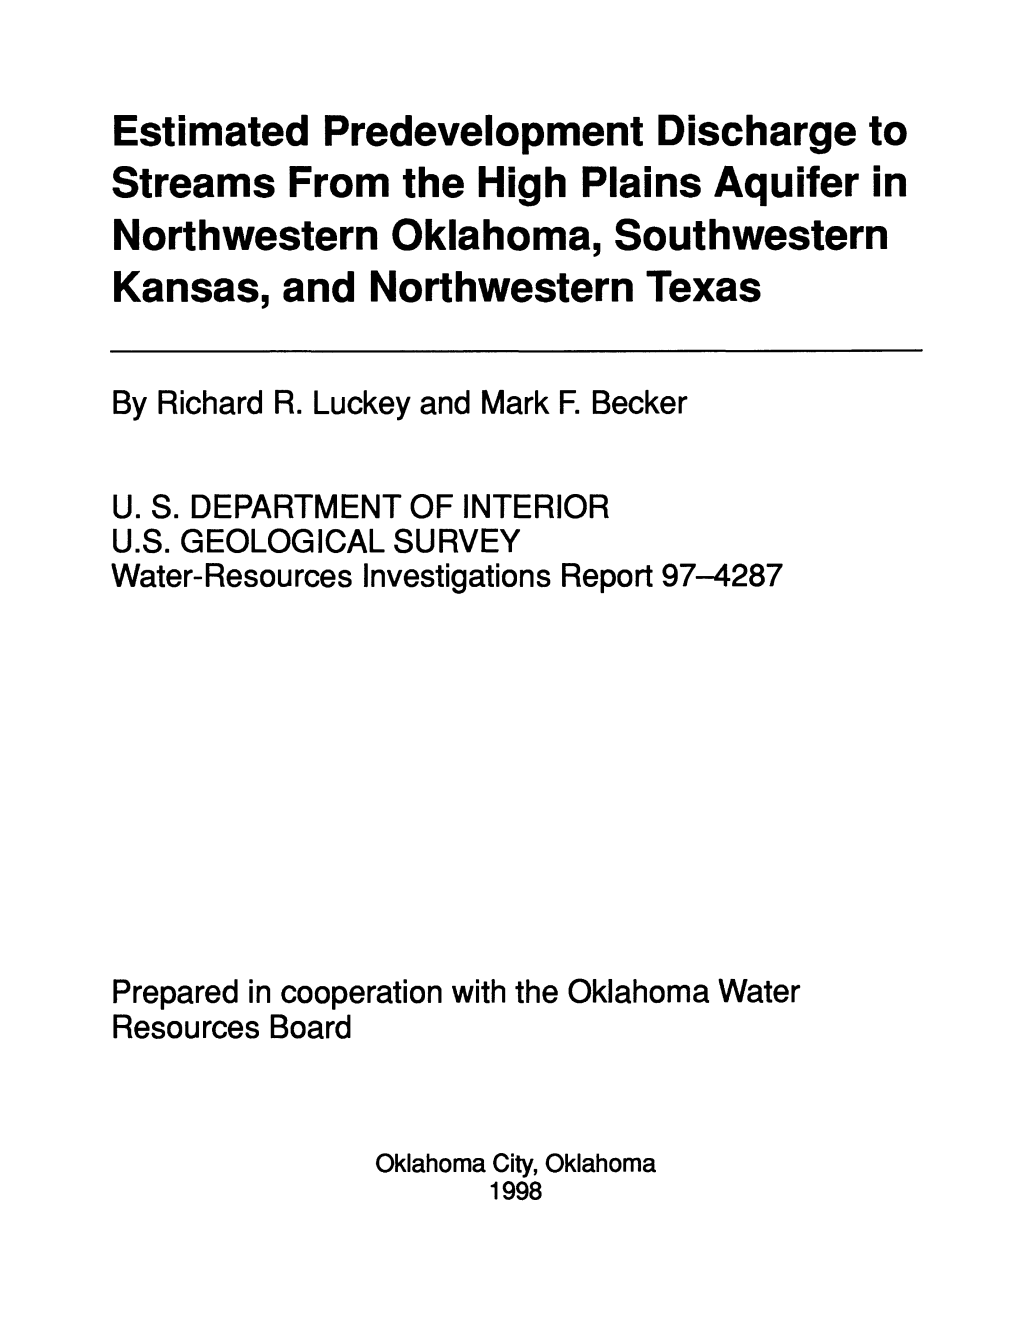 Estimated Predevelopment Discharge to Streams from the High Plains Aquifer in Northwestern Oklahoma, Southwestern Kansas, and Northwestern Texas